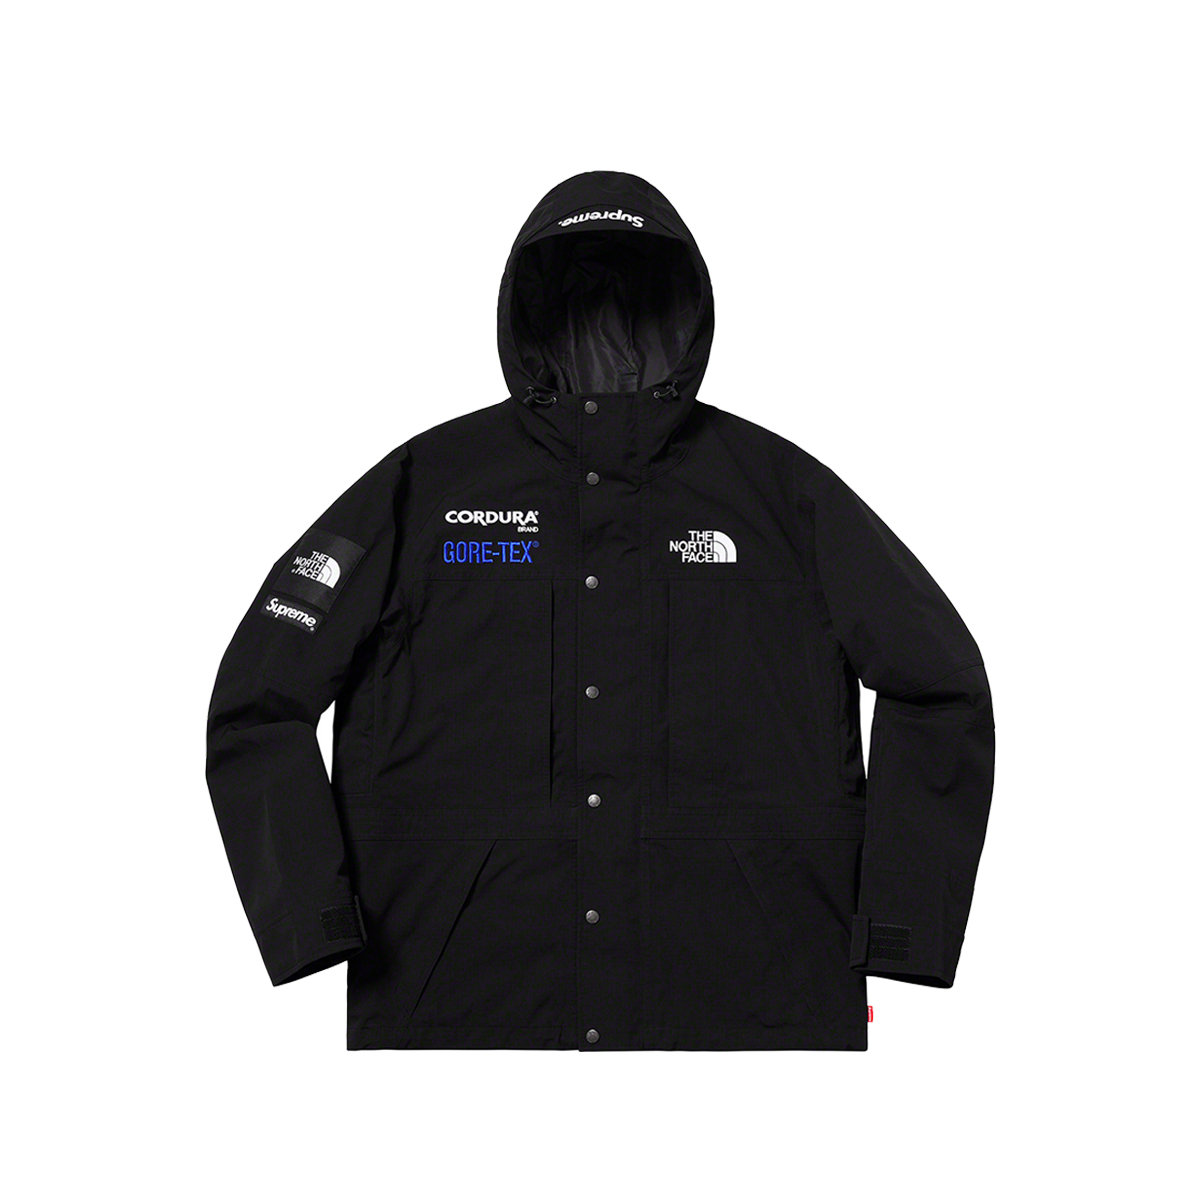 Supreme x The North Face Expedition TNF Jacket Black (FW18) | TBD - KLEKT